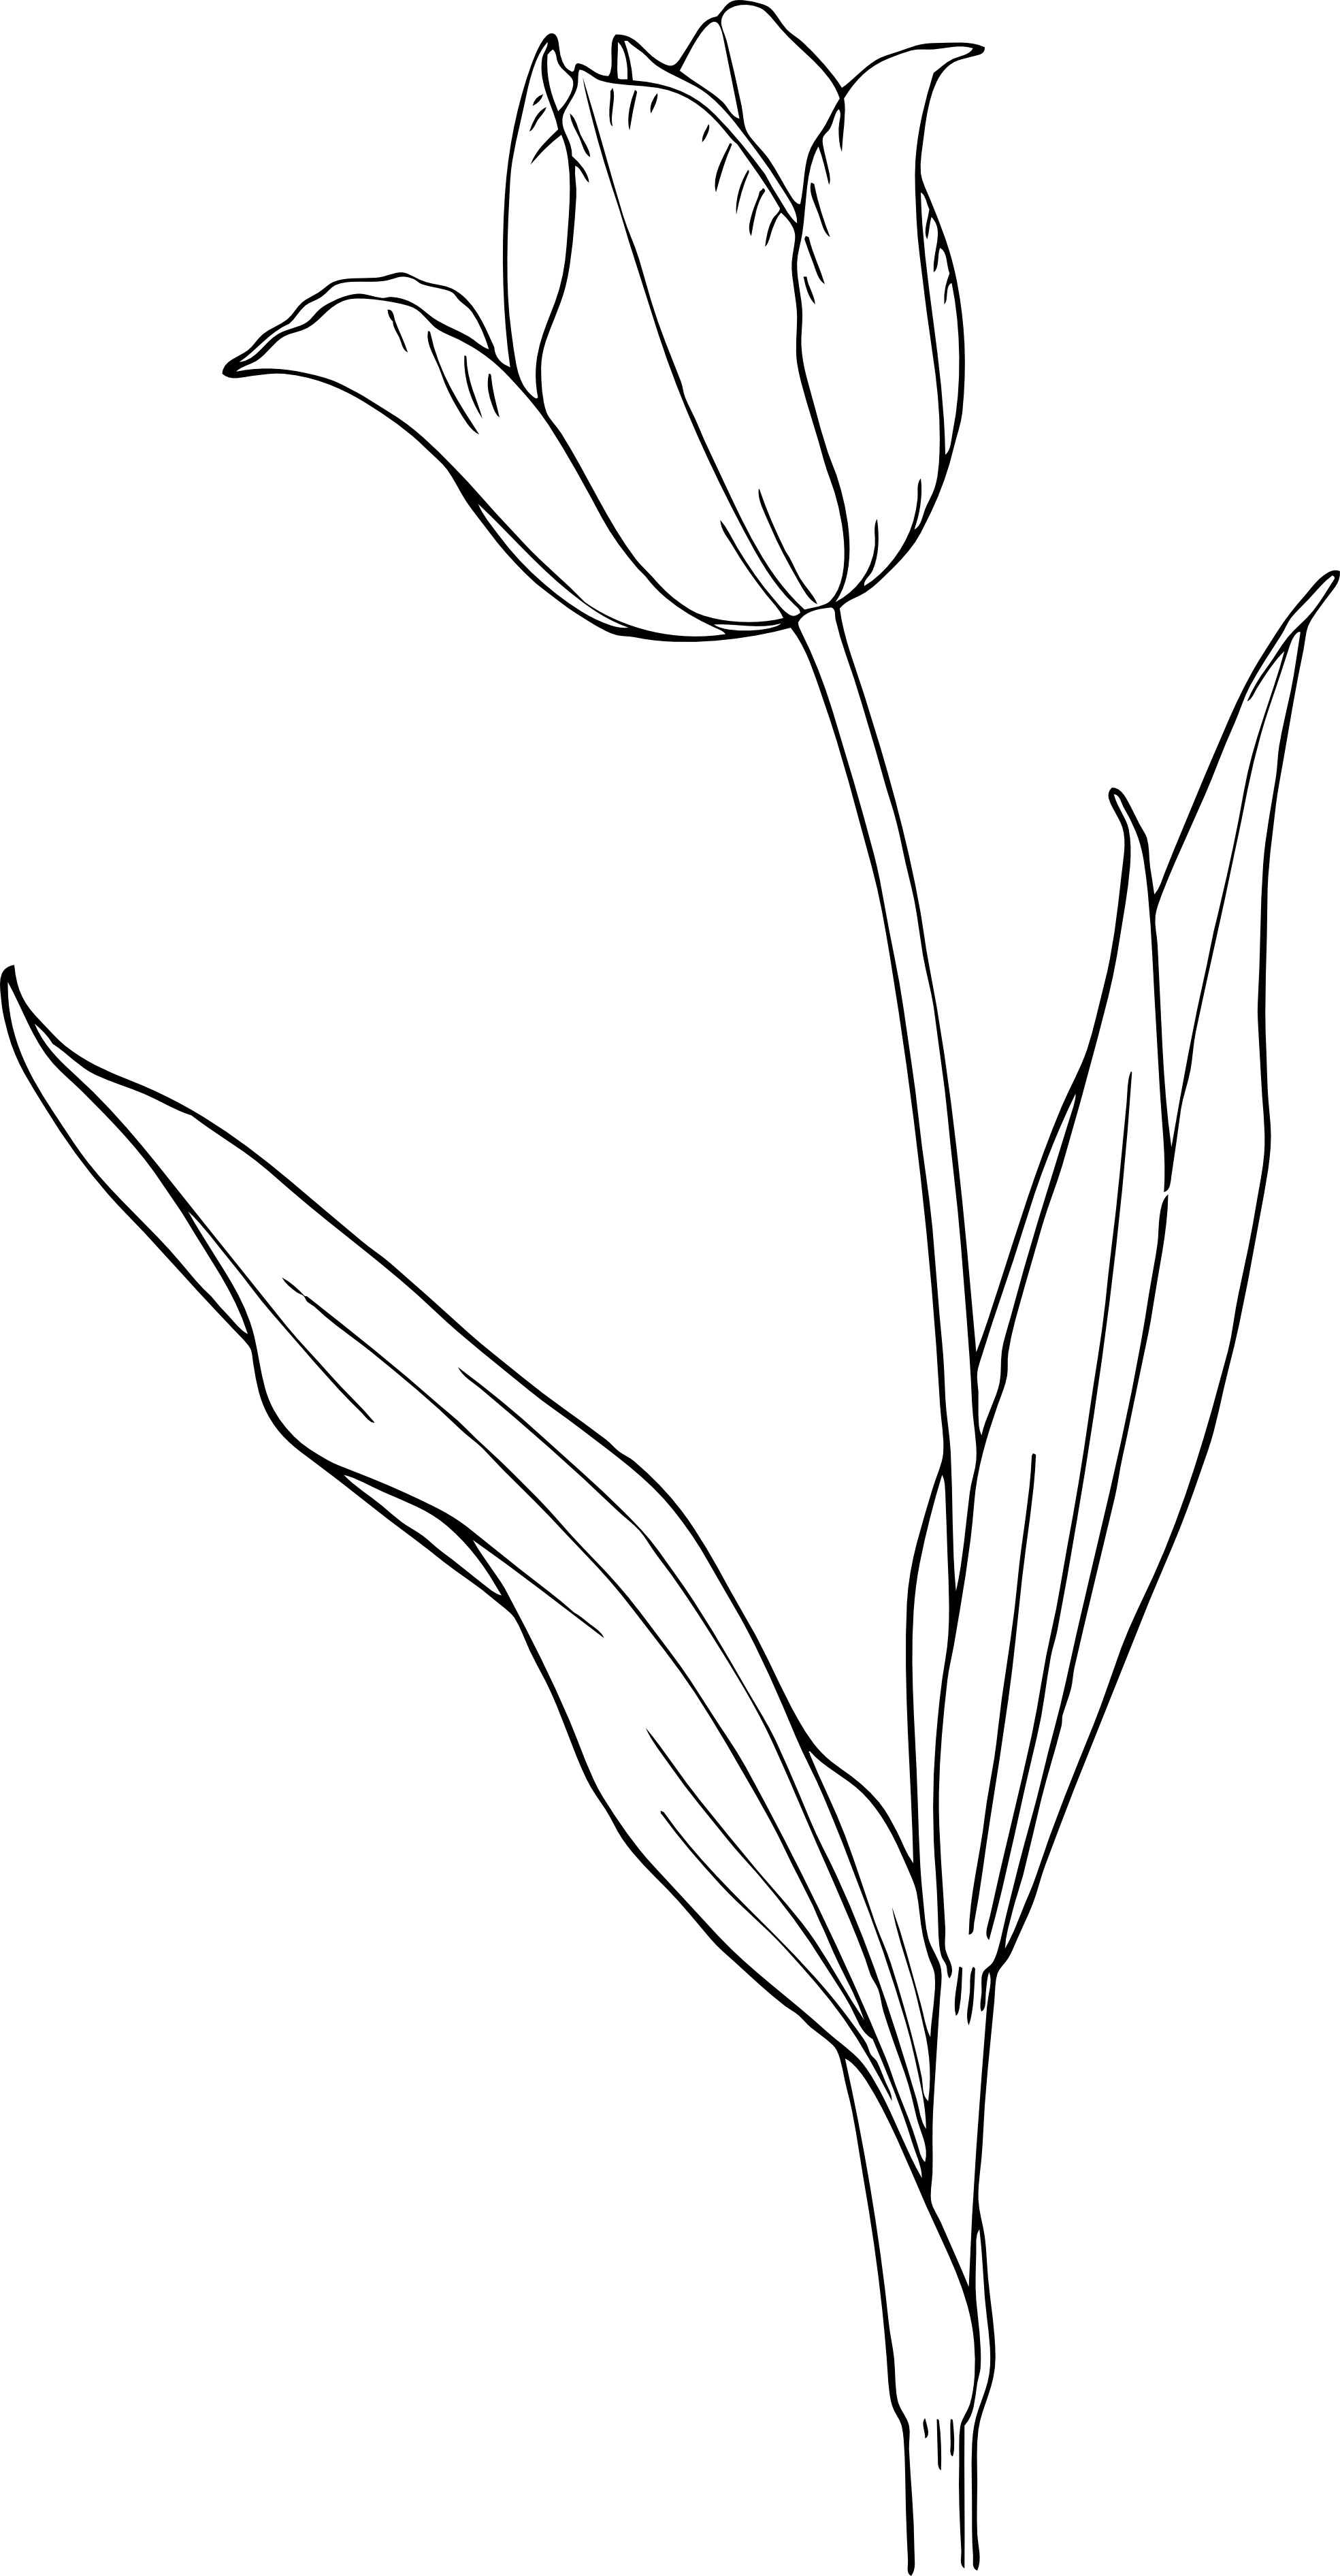 Easy Drawings Of Flowers ~ Free Printable Tulip Coloring Pages For Kids ...